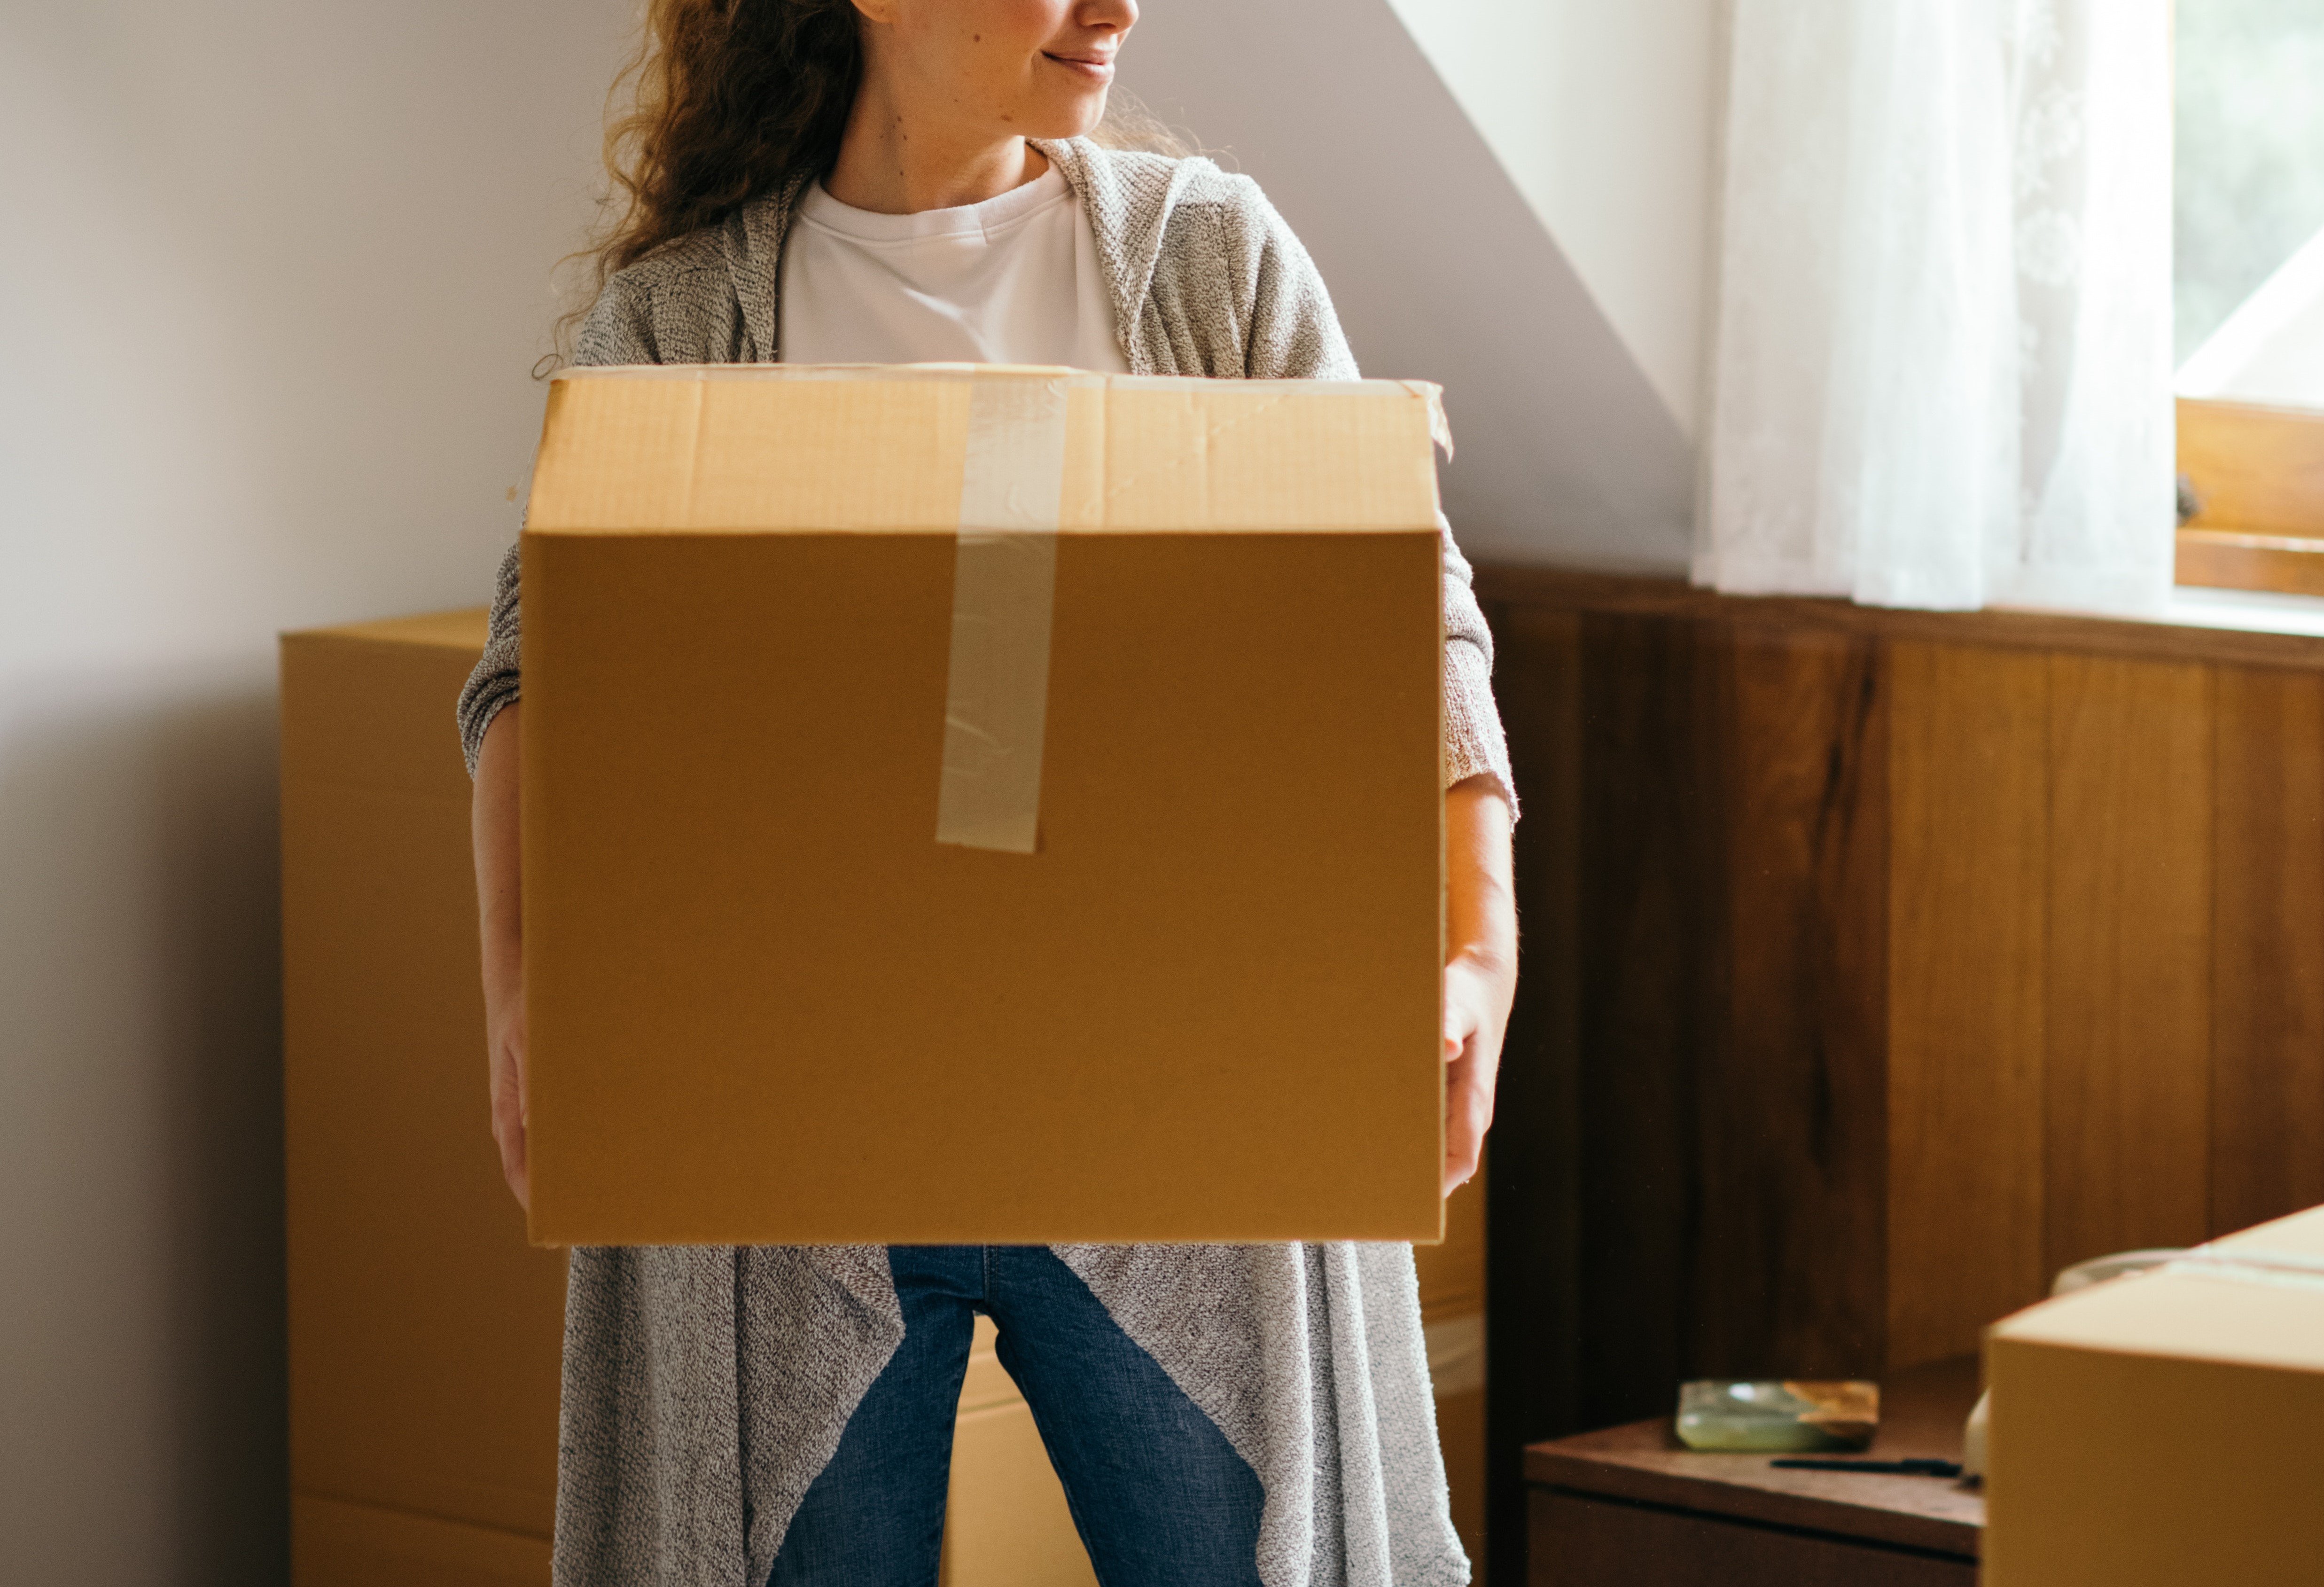 A woman holding a cardboard box | Source: Pexels